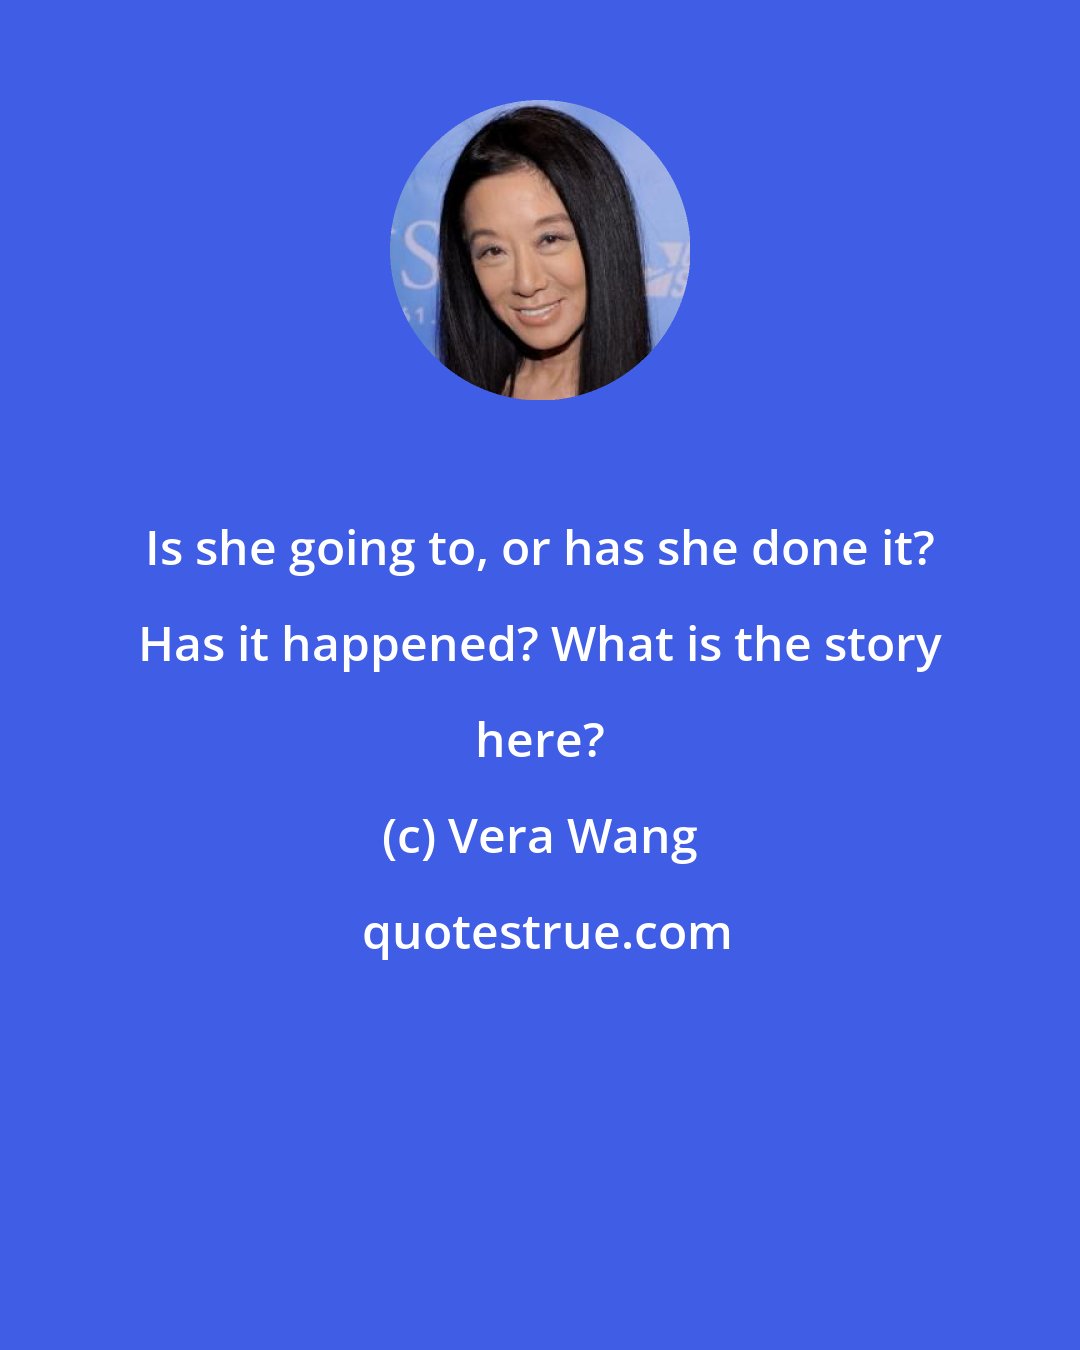 Vera Wang: Is she going to, or has she done it? Has it happened? What is the story here?